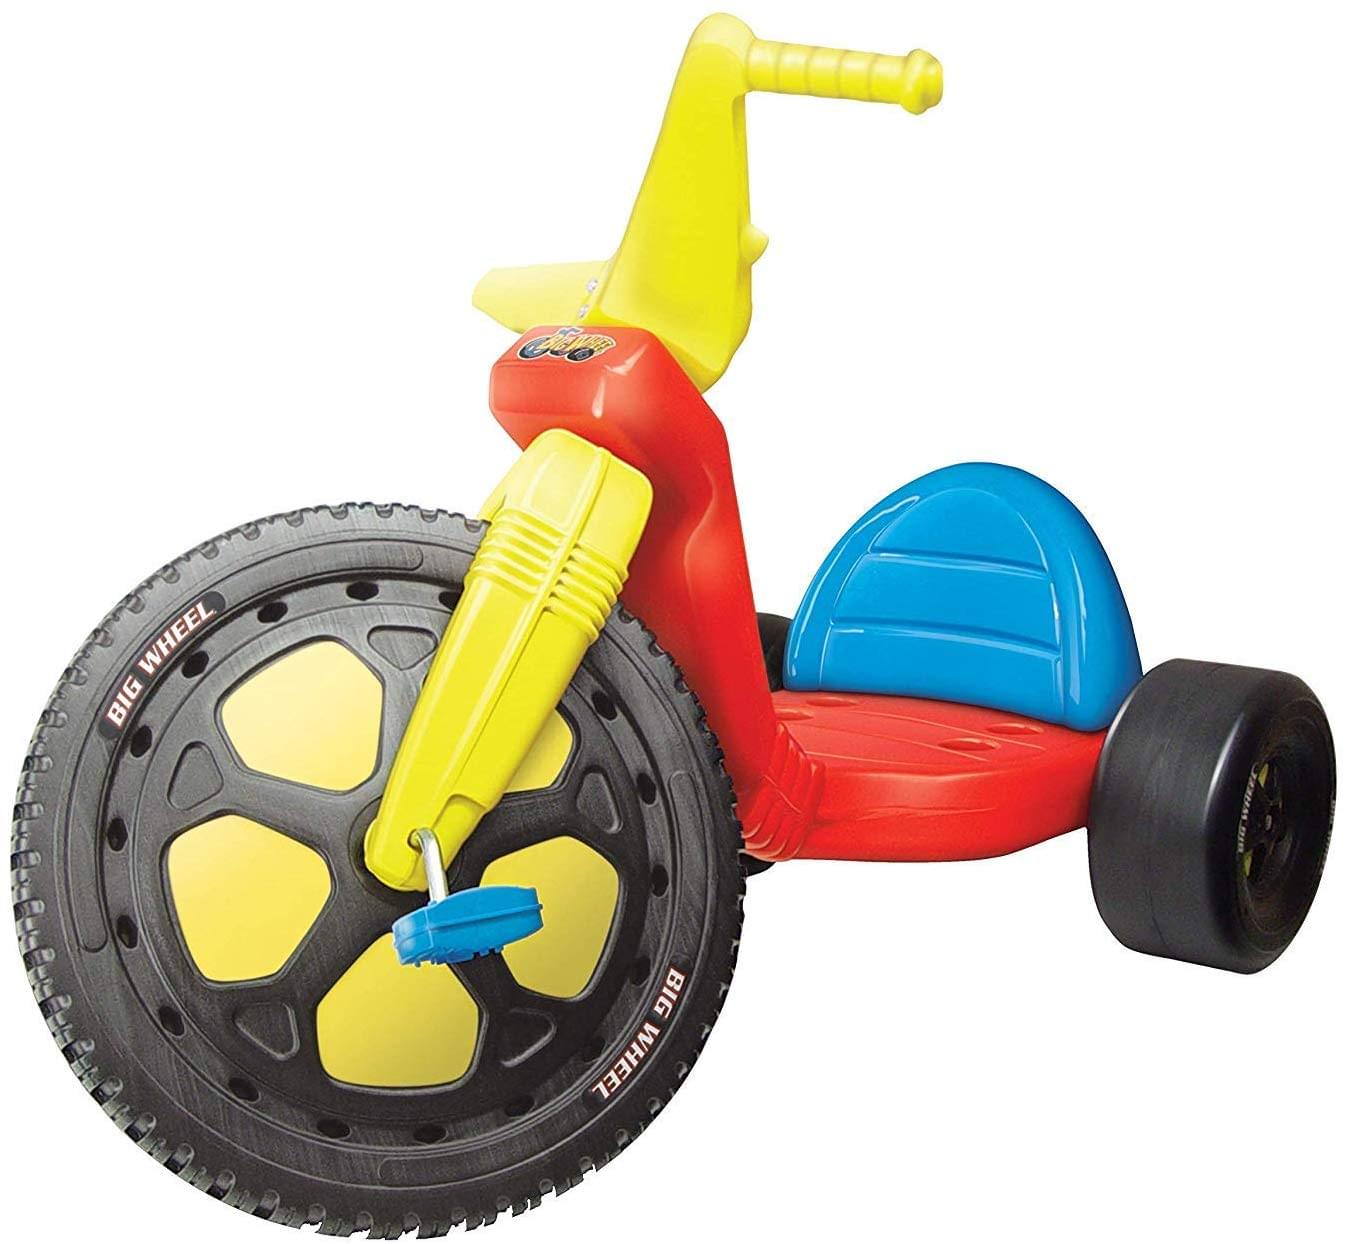 The Original Big Wheel 50th Anniversary Ride-On Toy For Kids | 16 Inches